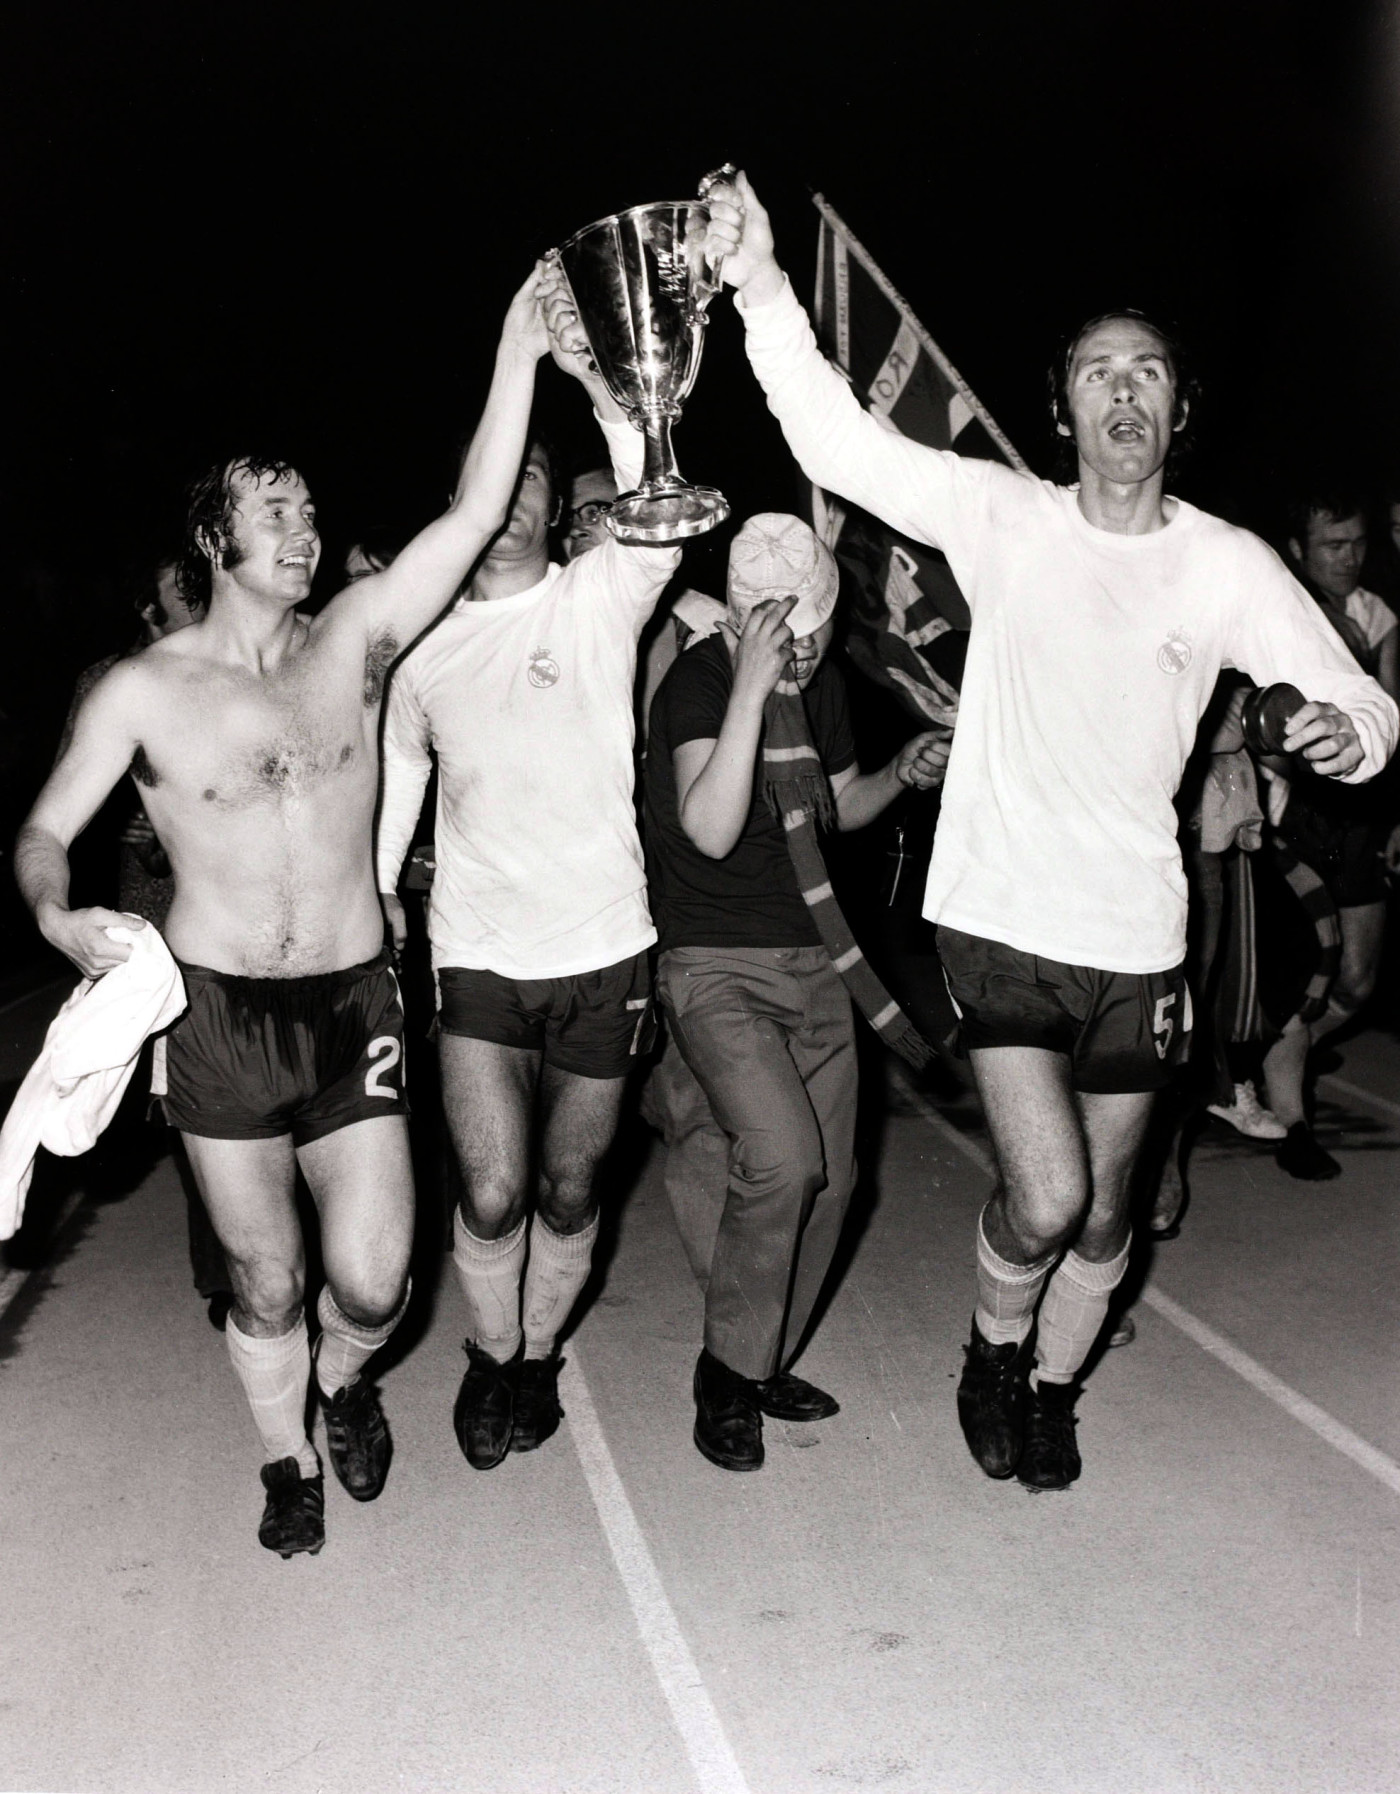 Boyle celebrates with team-mate John Dempsey following the Cup Winners' Cup victory over Real Madrid in Athens in 1971